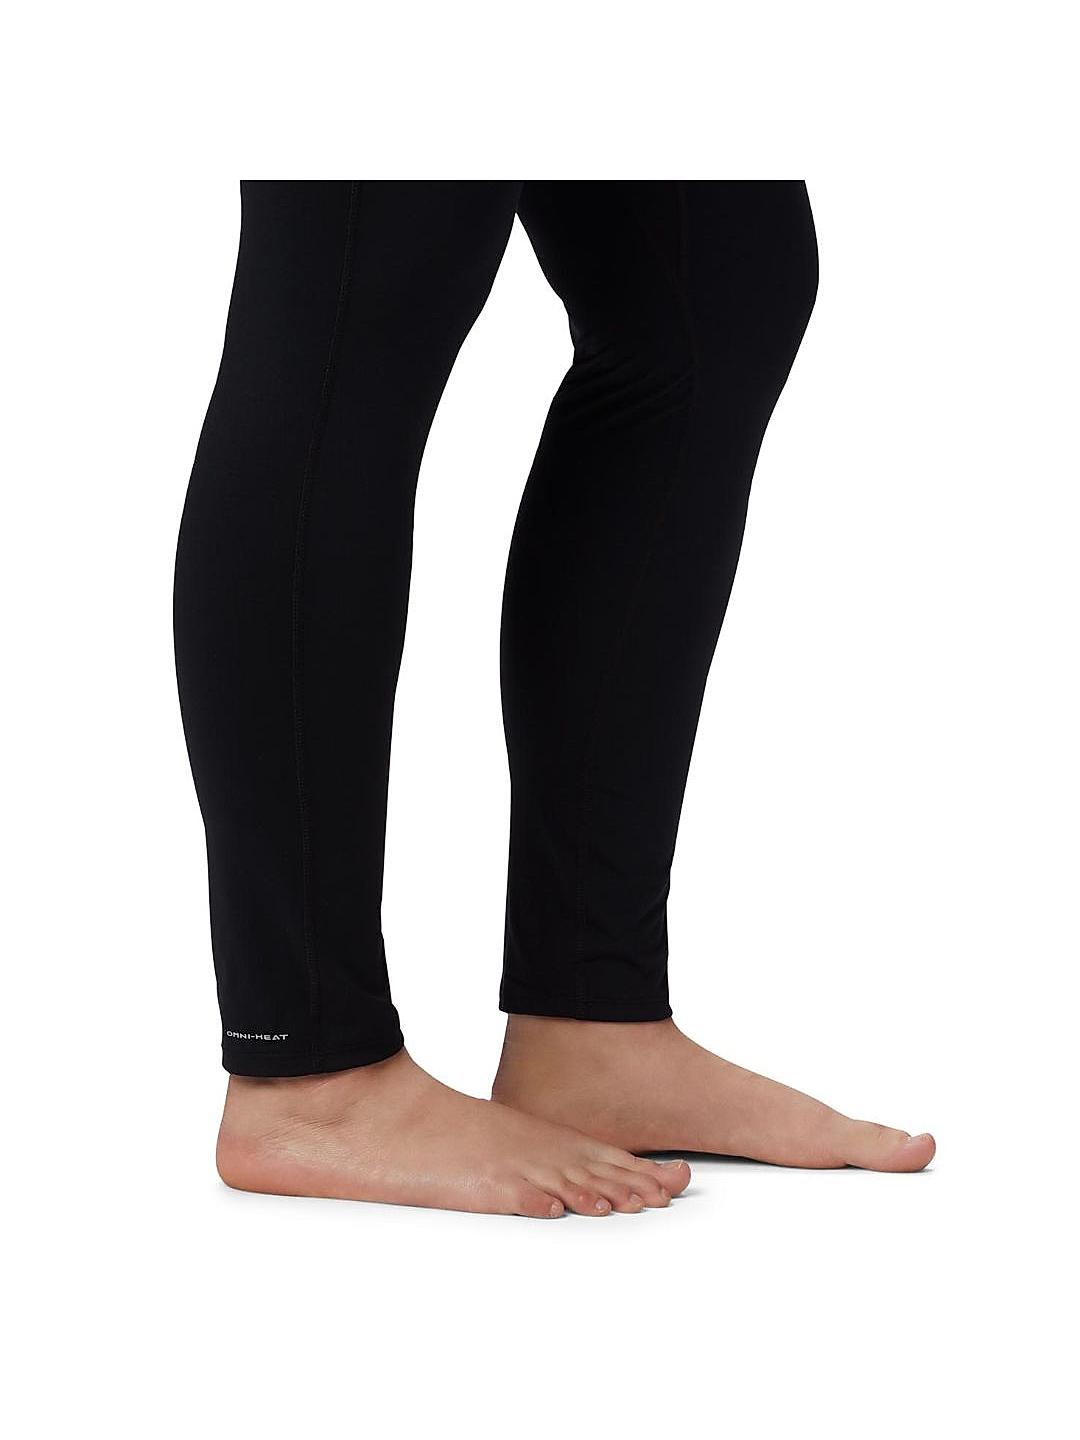  Columbia Women's Baselayer Midweight Tight, Imperial